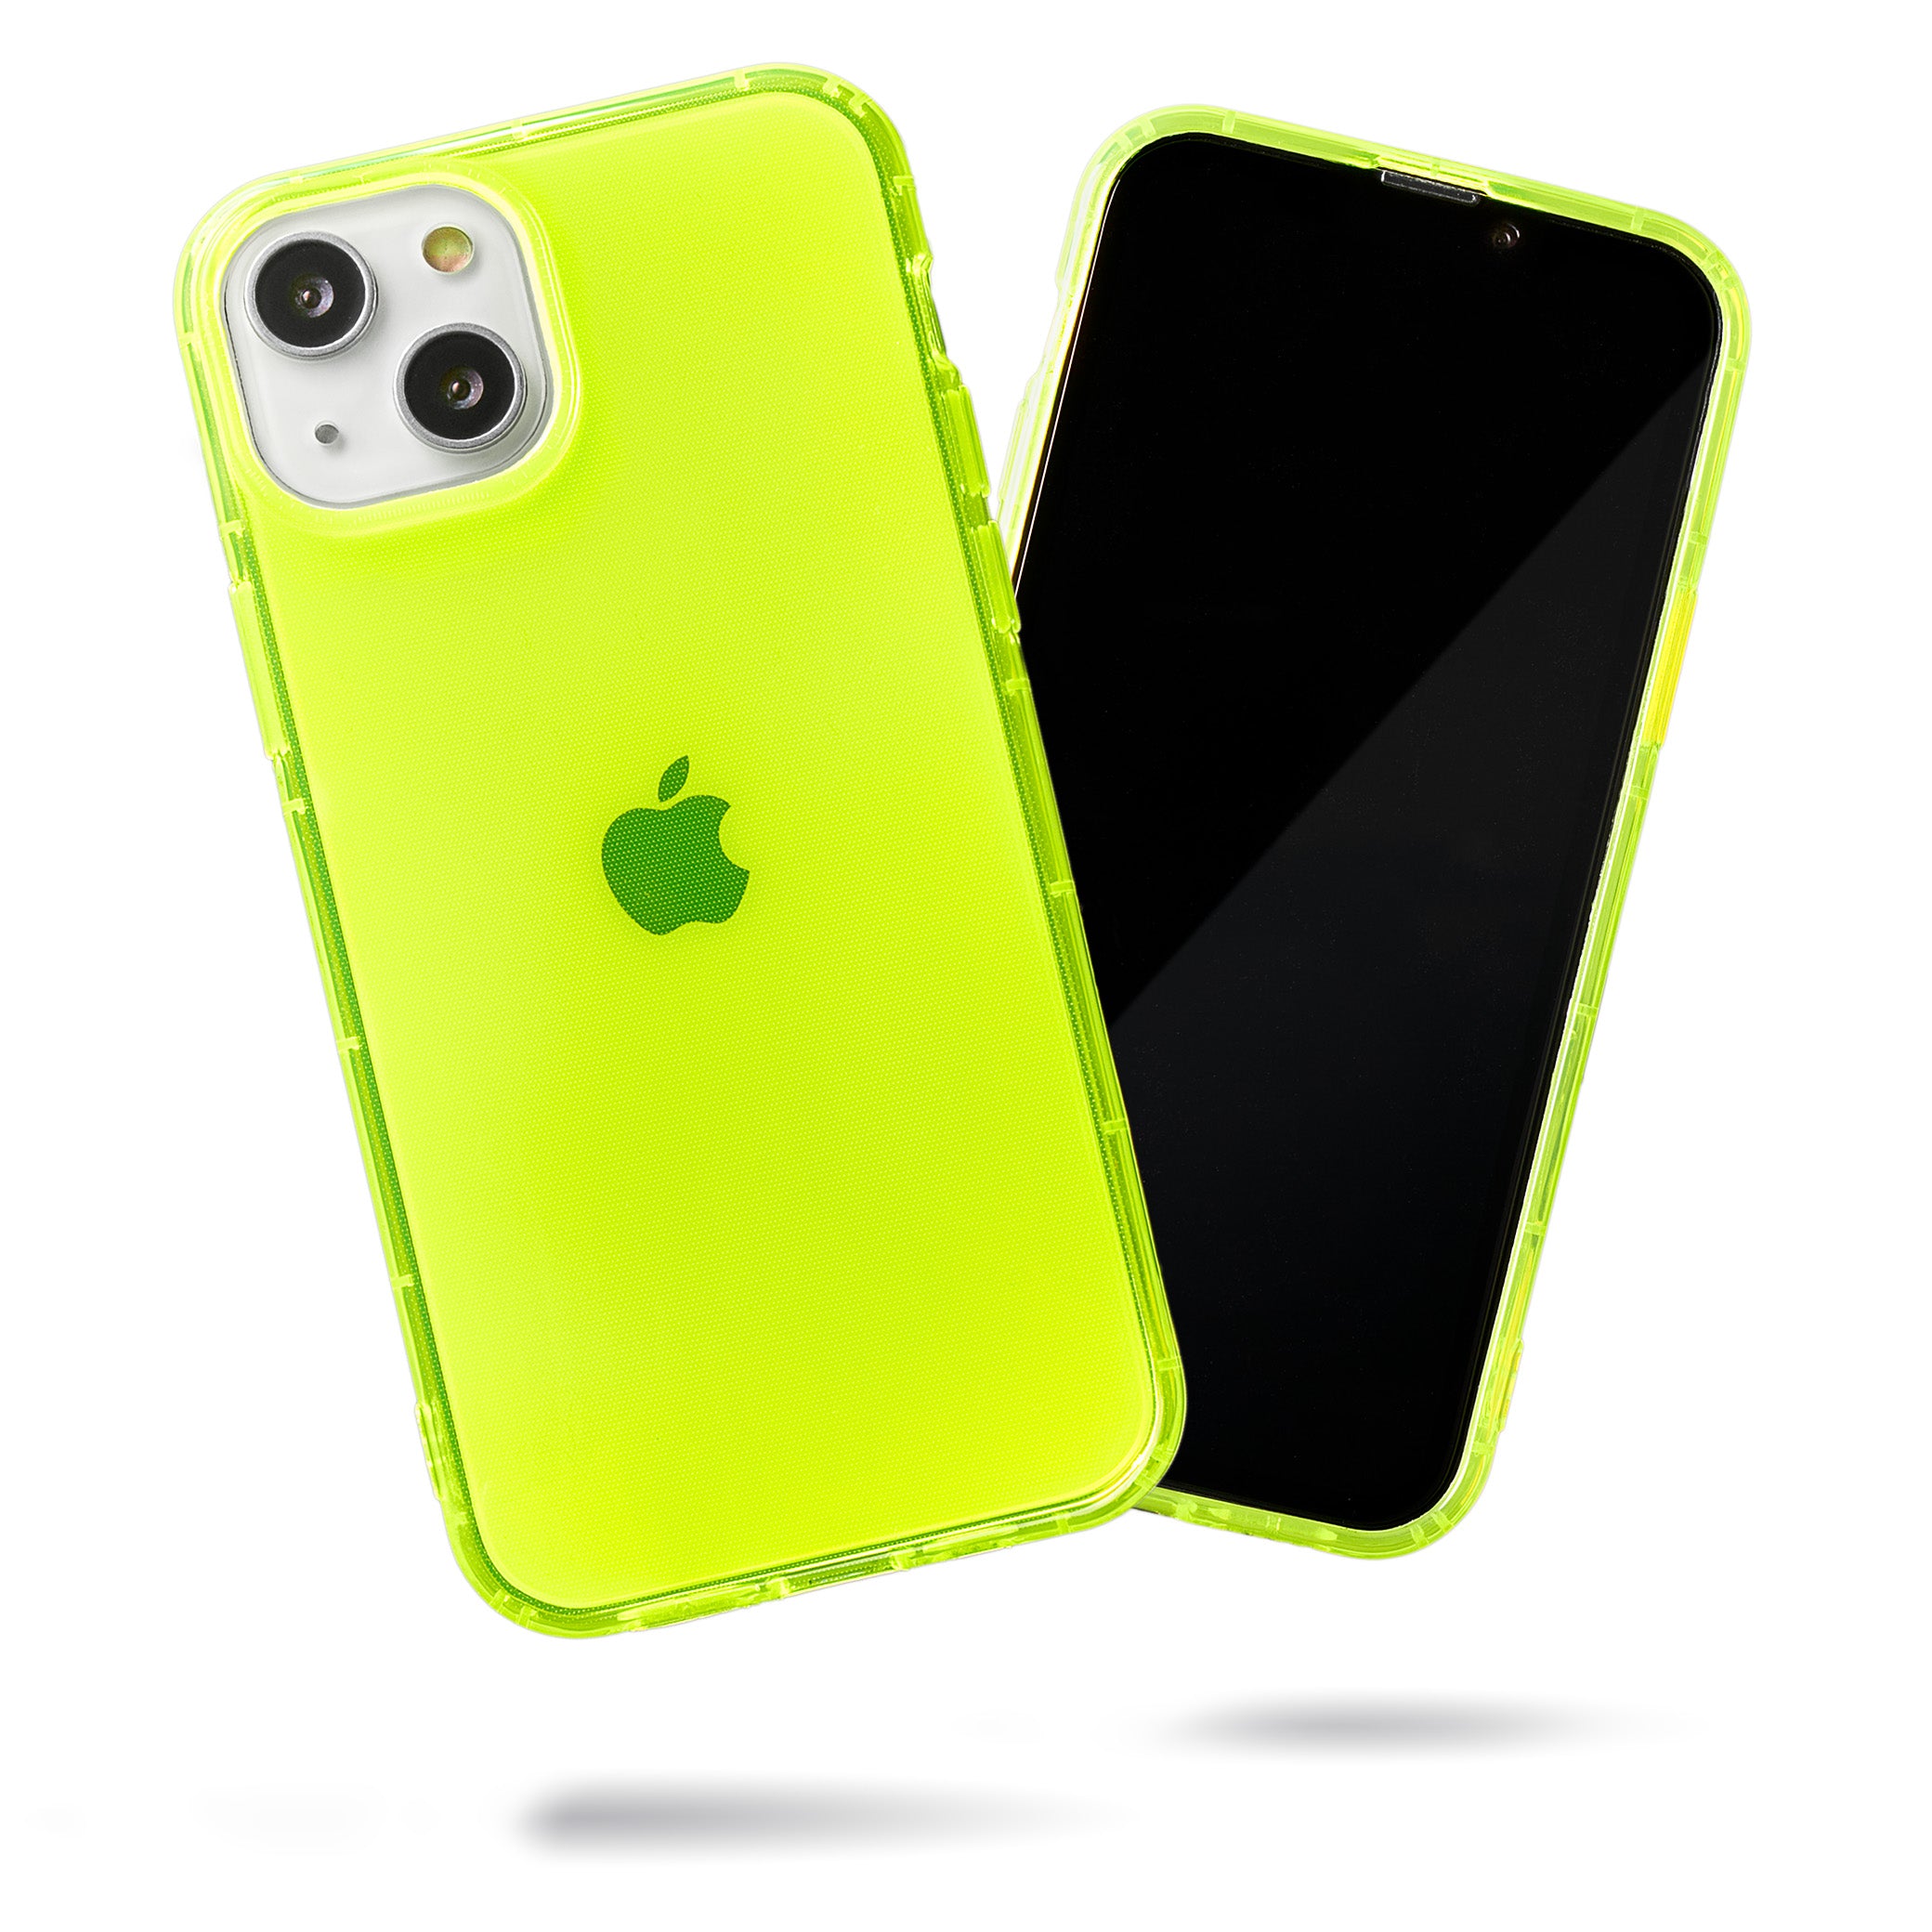 Highlighter Case for iPhone 13 - Conspicuous Neon Yellow